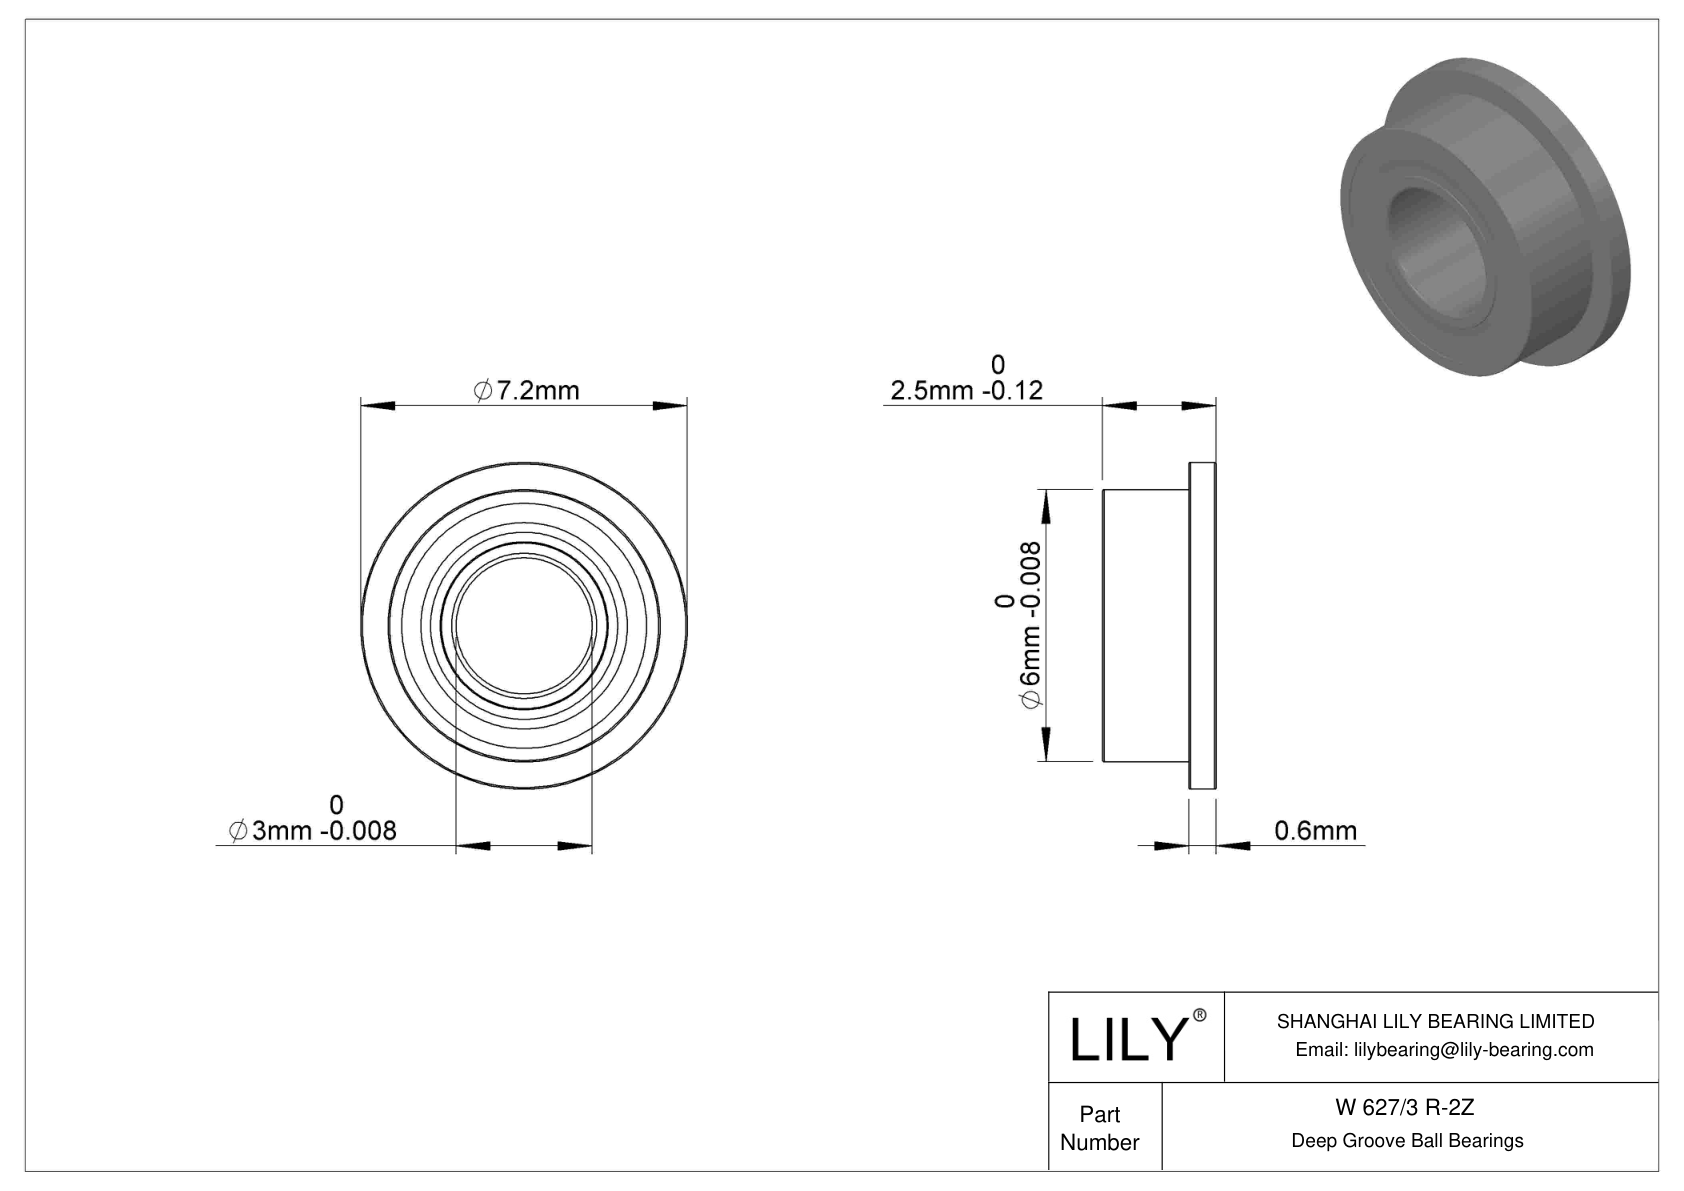 W 627/3 R-2Z Flanged Ball Bearings cad drawing